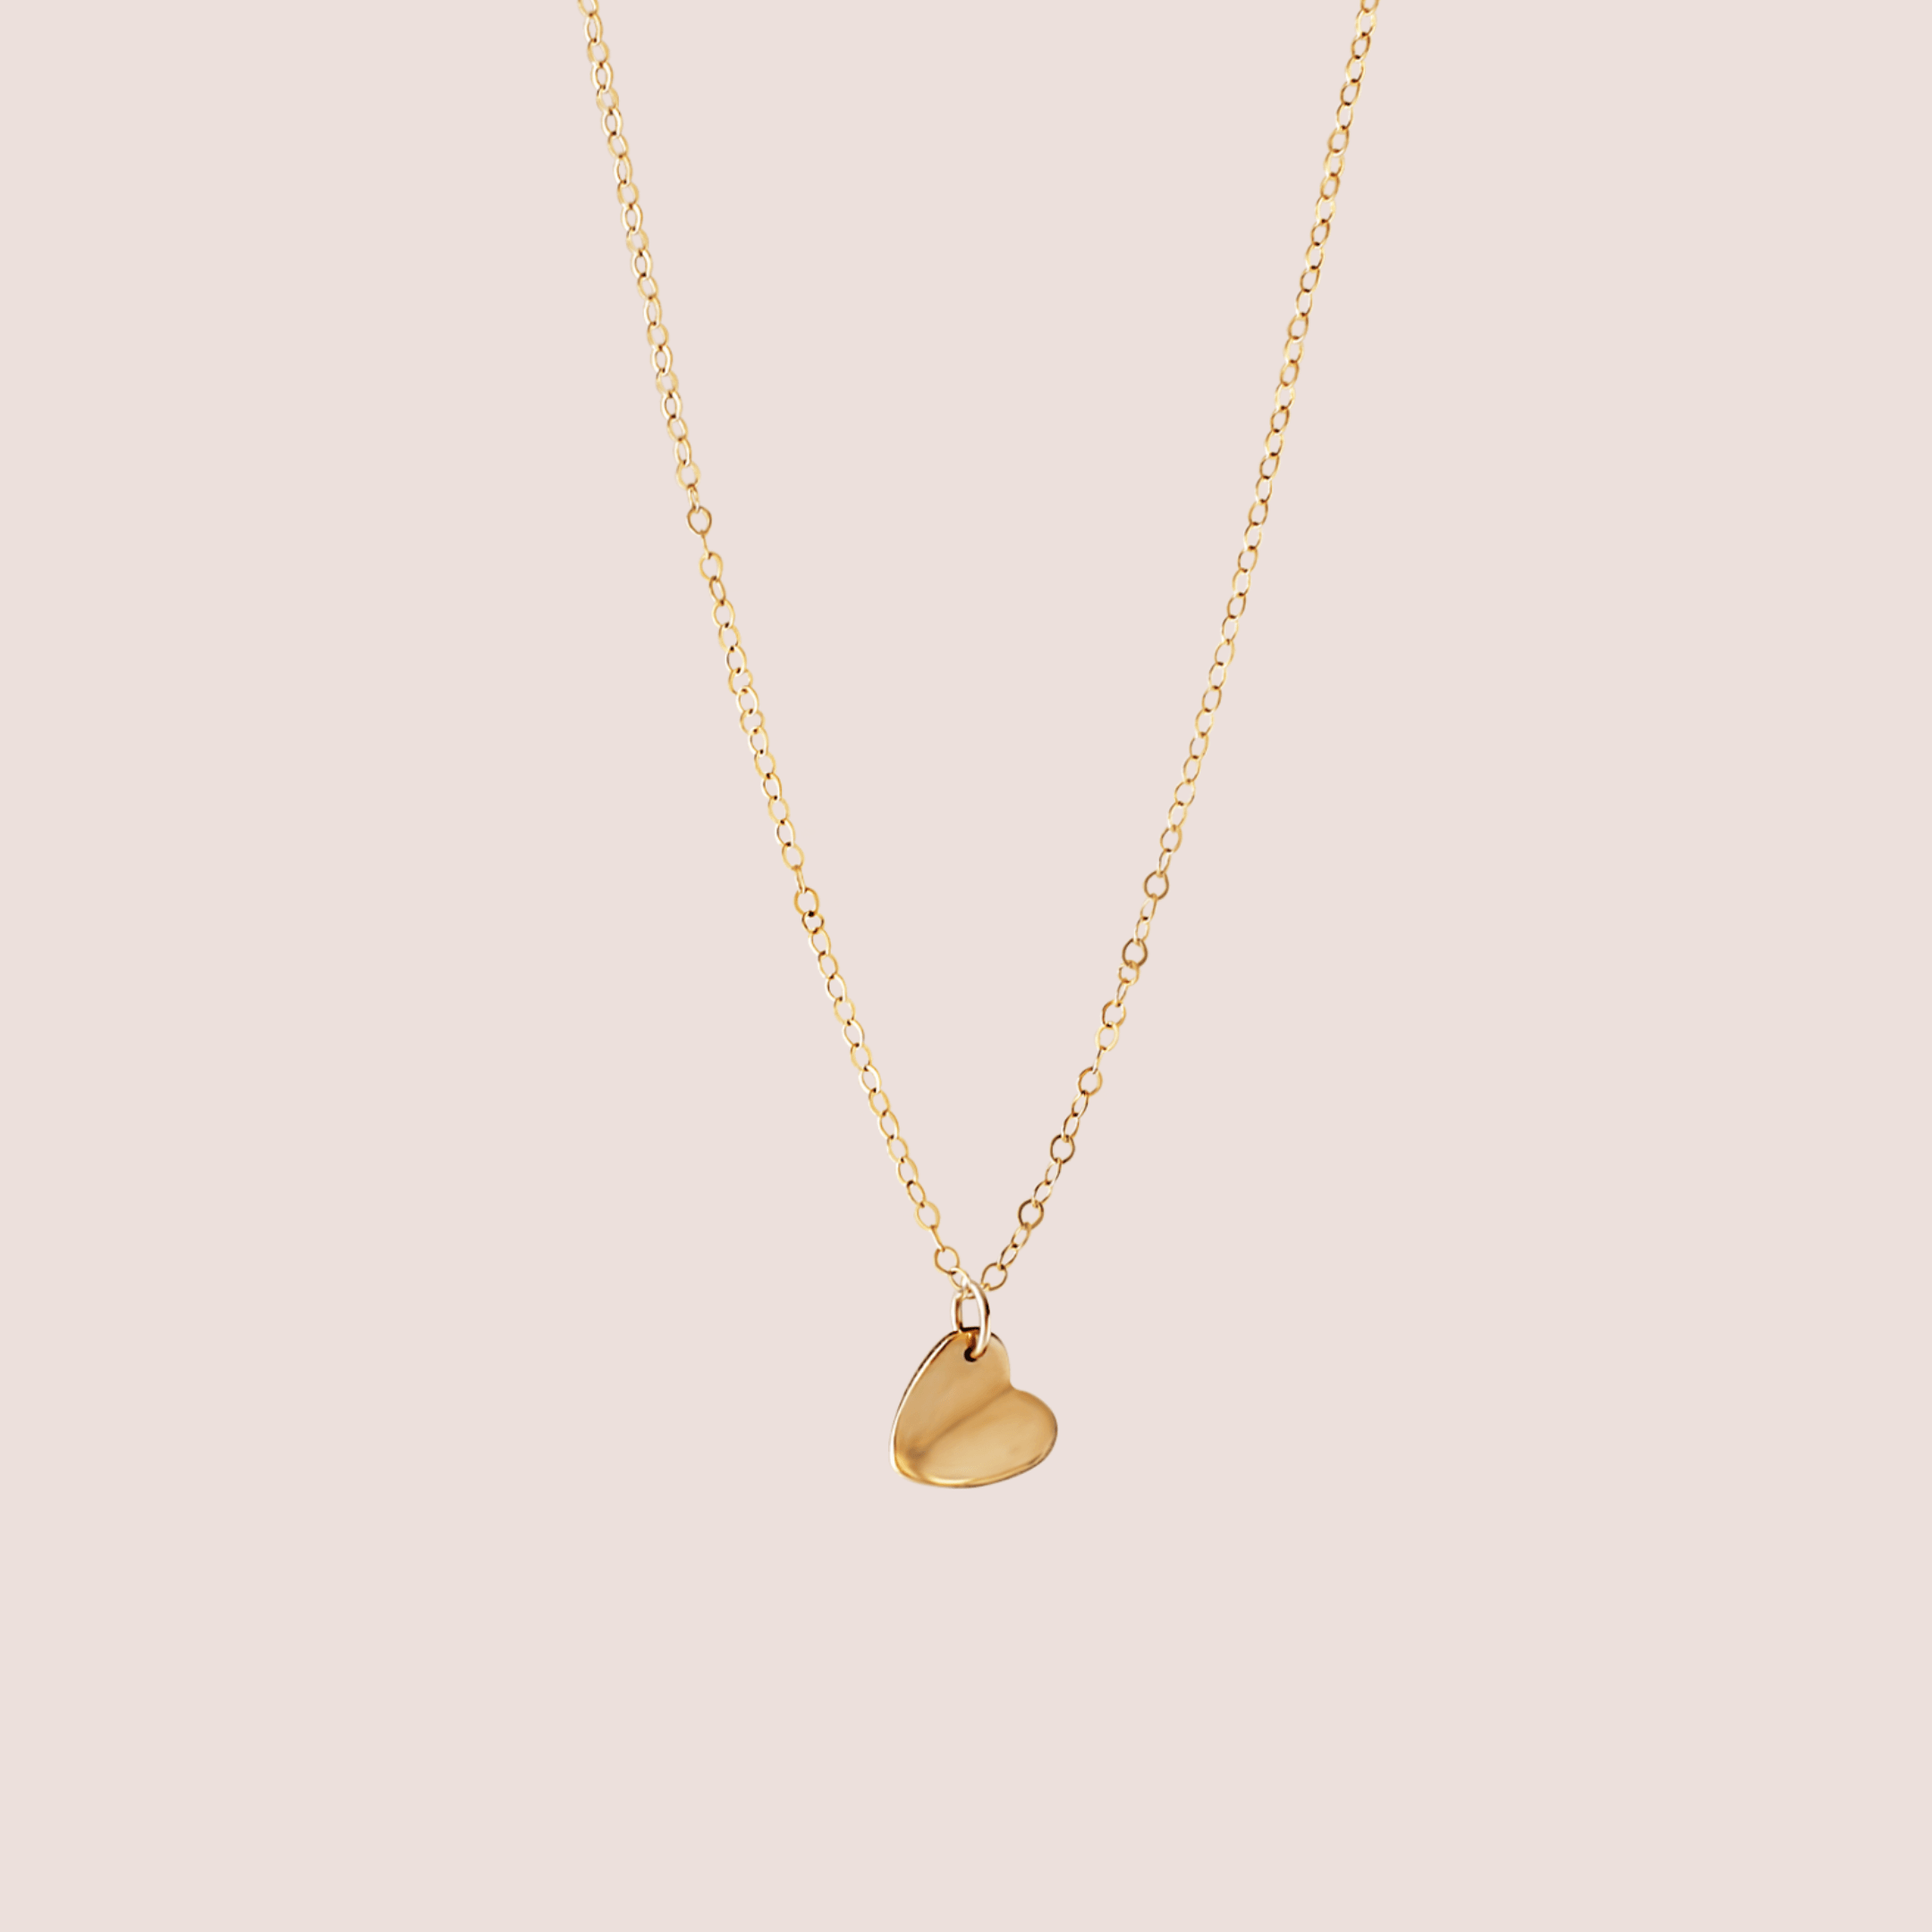 Mini Paper Heart Necklace - Nolia Jewelry - Meaningful + Sustainably Handcrafted Jewelry